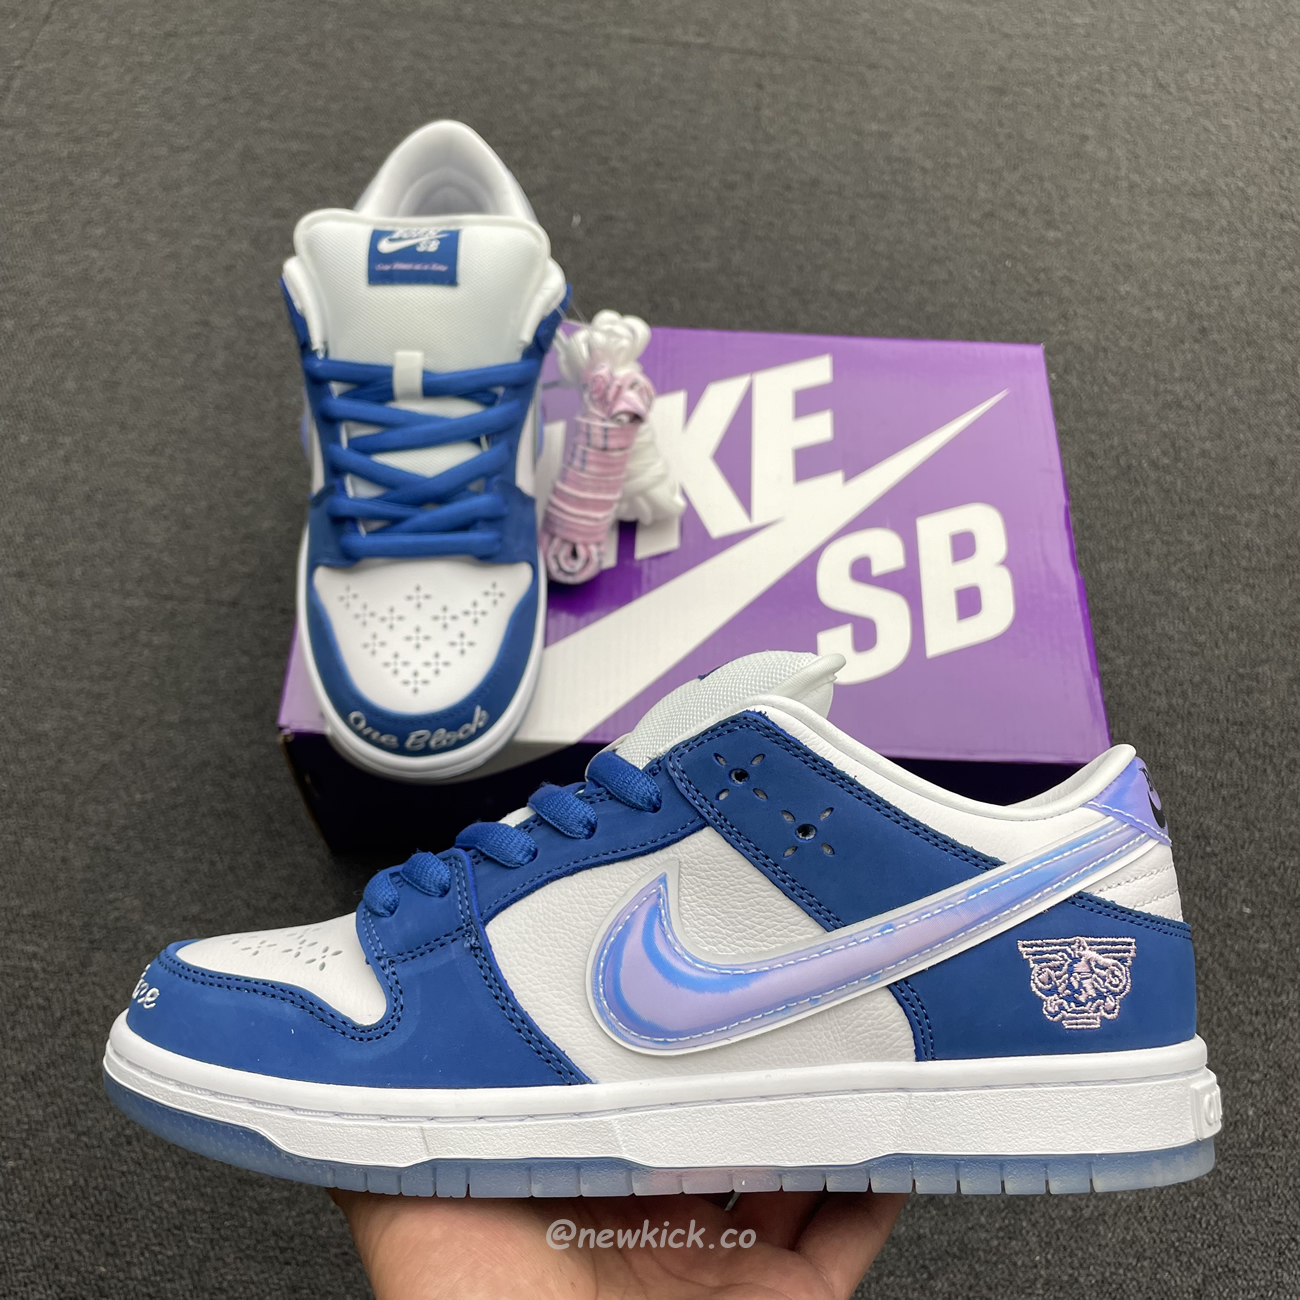 Nike Sb Dunk Low Born X Raised One Block At A Time Fn7819 400 (13) - newkick.org